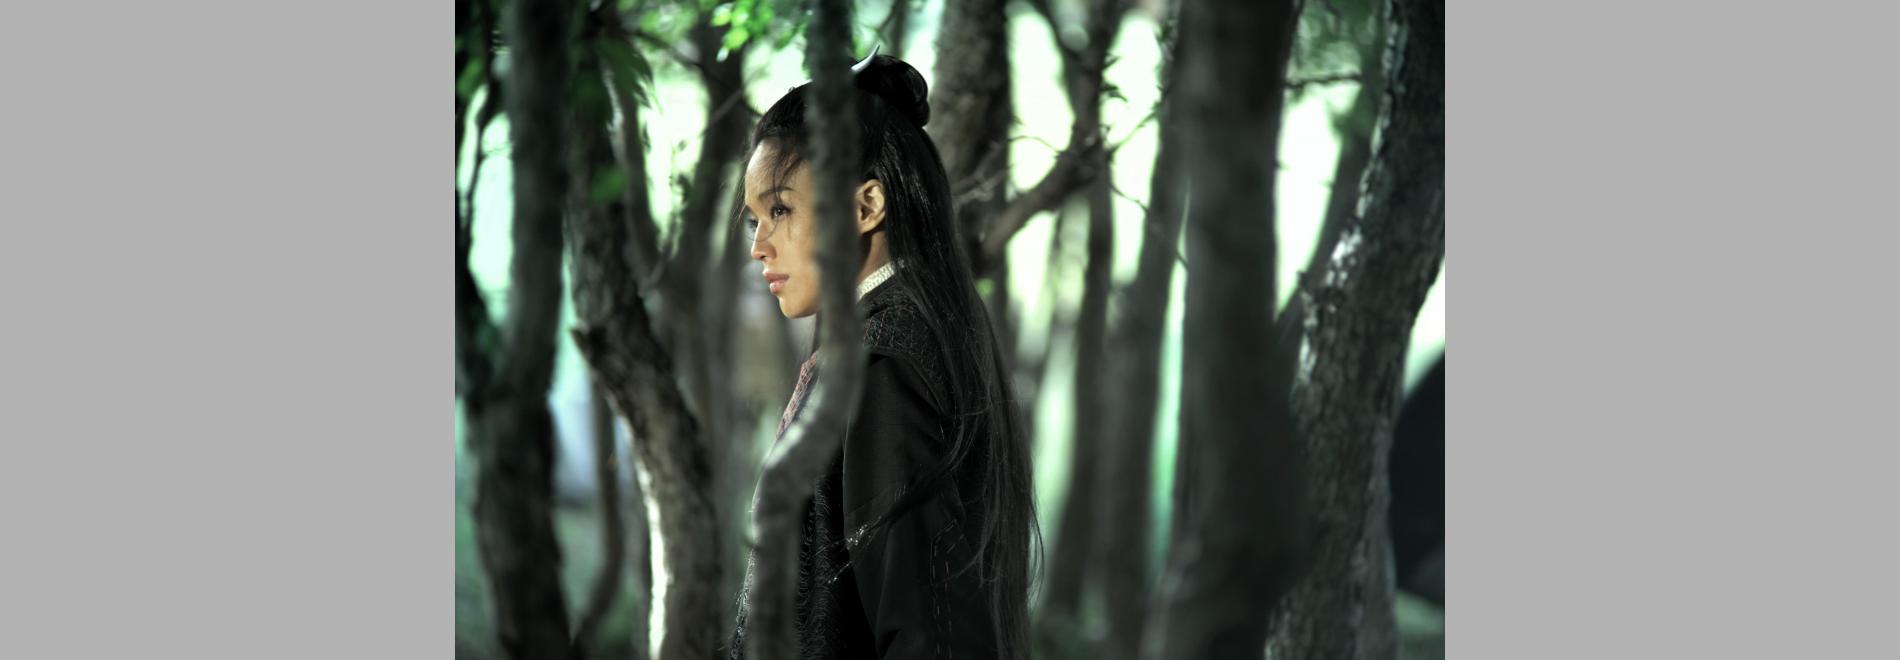 Nie yin niang / The Assassin (La asesina) (Hou Hsiao-hsien, 2015)